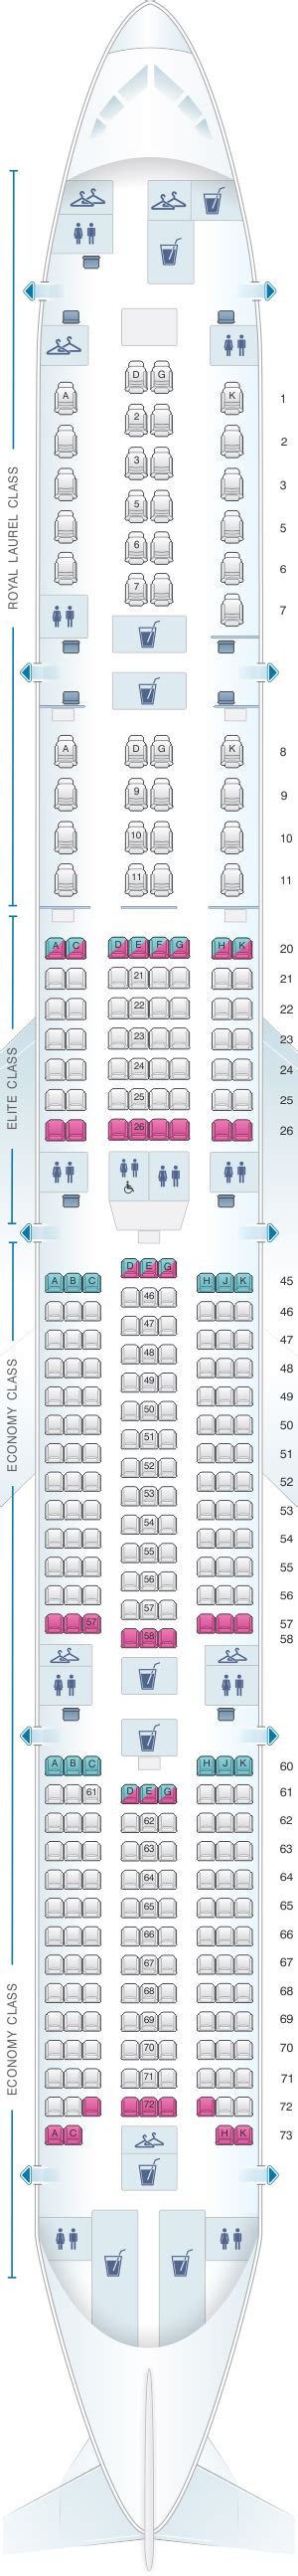 Sep 9, 2017 · Yes. Detailed seat map EVA Air Airbus A321 200. Find the best airplanes seats, information on legroom, recline and in-flight entertainment using our detailed online seating charts. . 